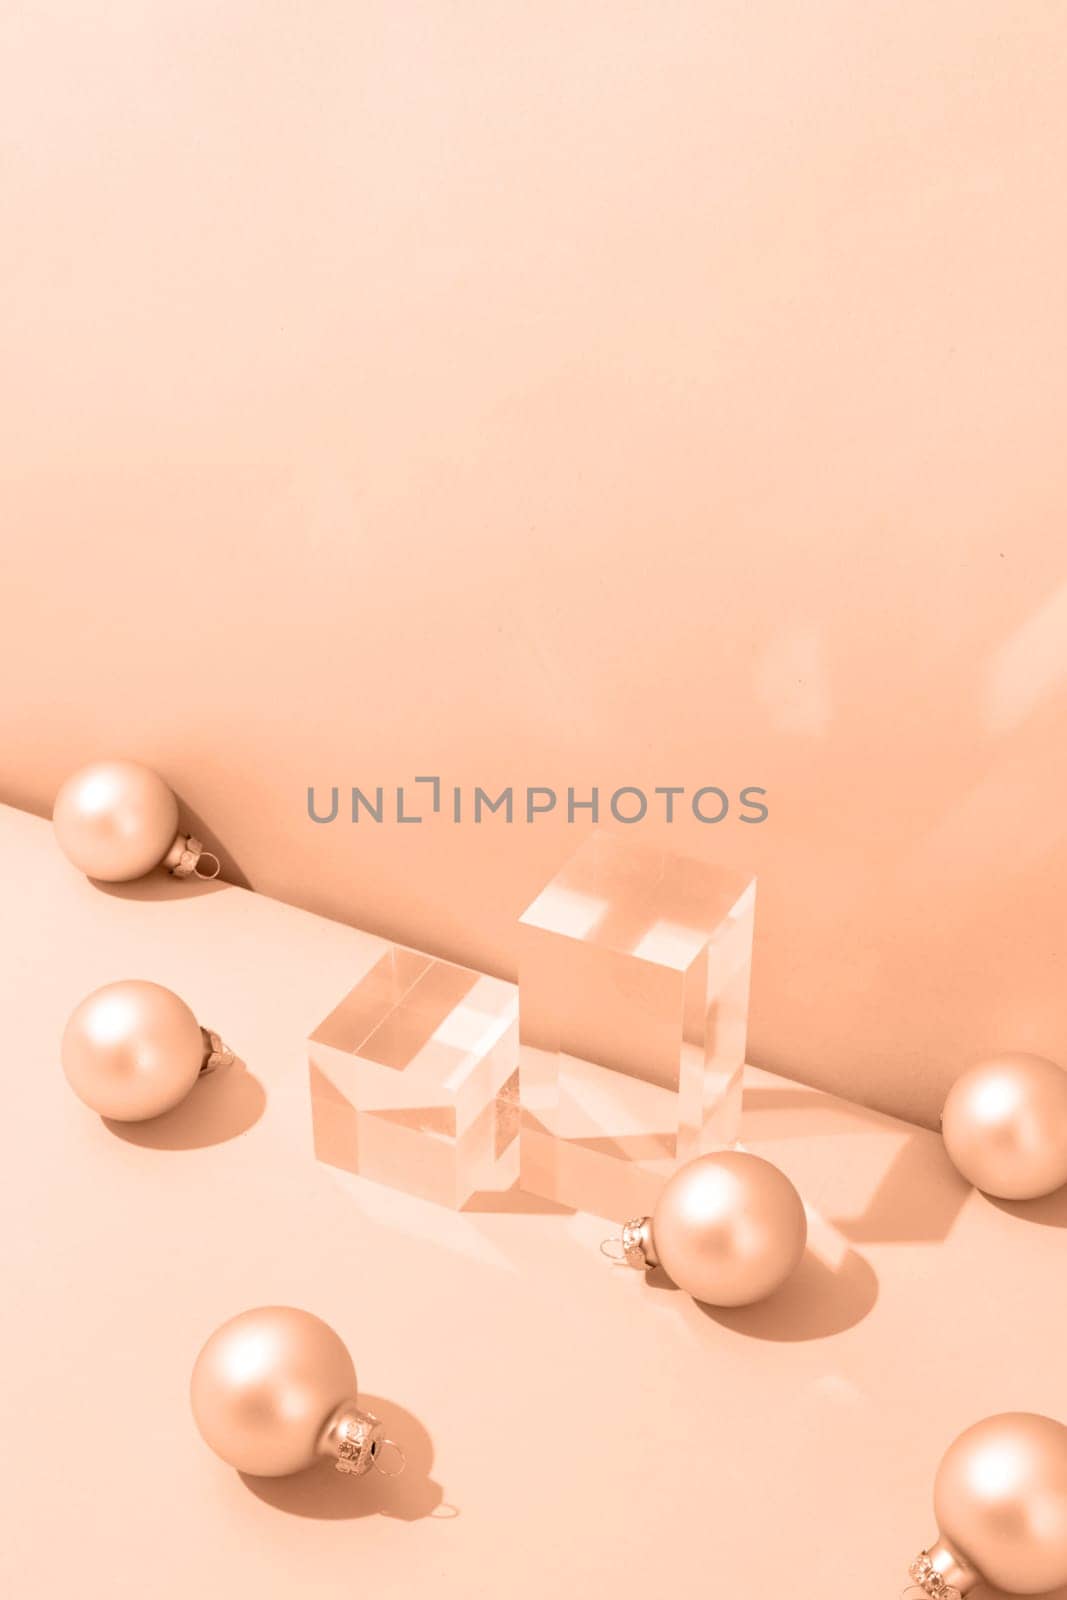 A minimalistic scene of glass podium with christmas pine tree and balls on beige background by Desperada